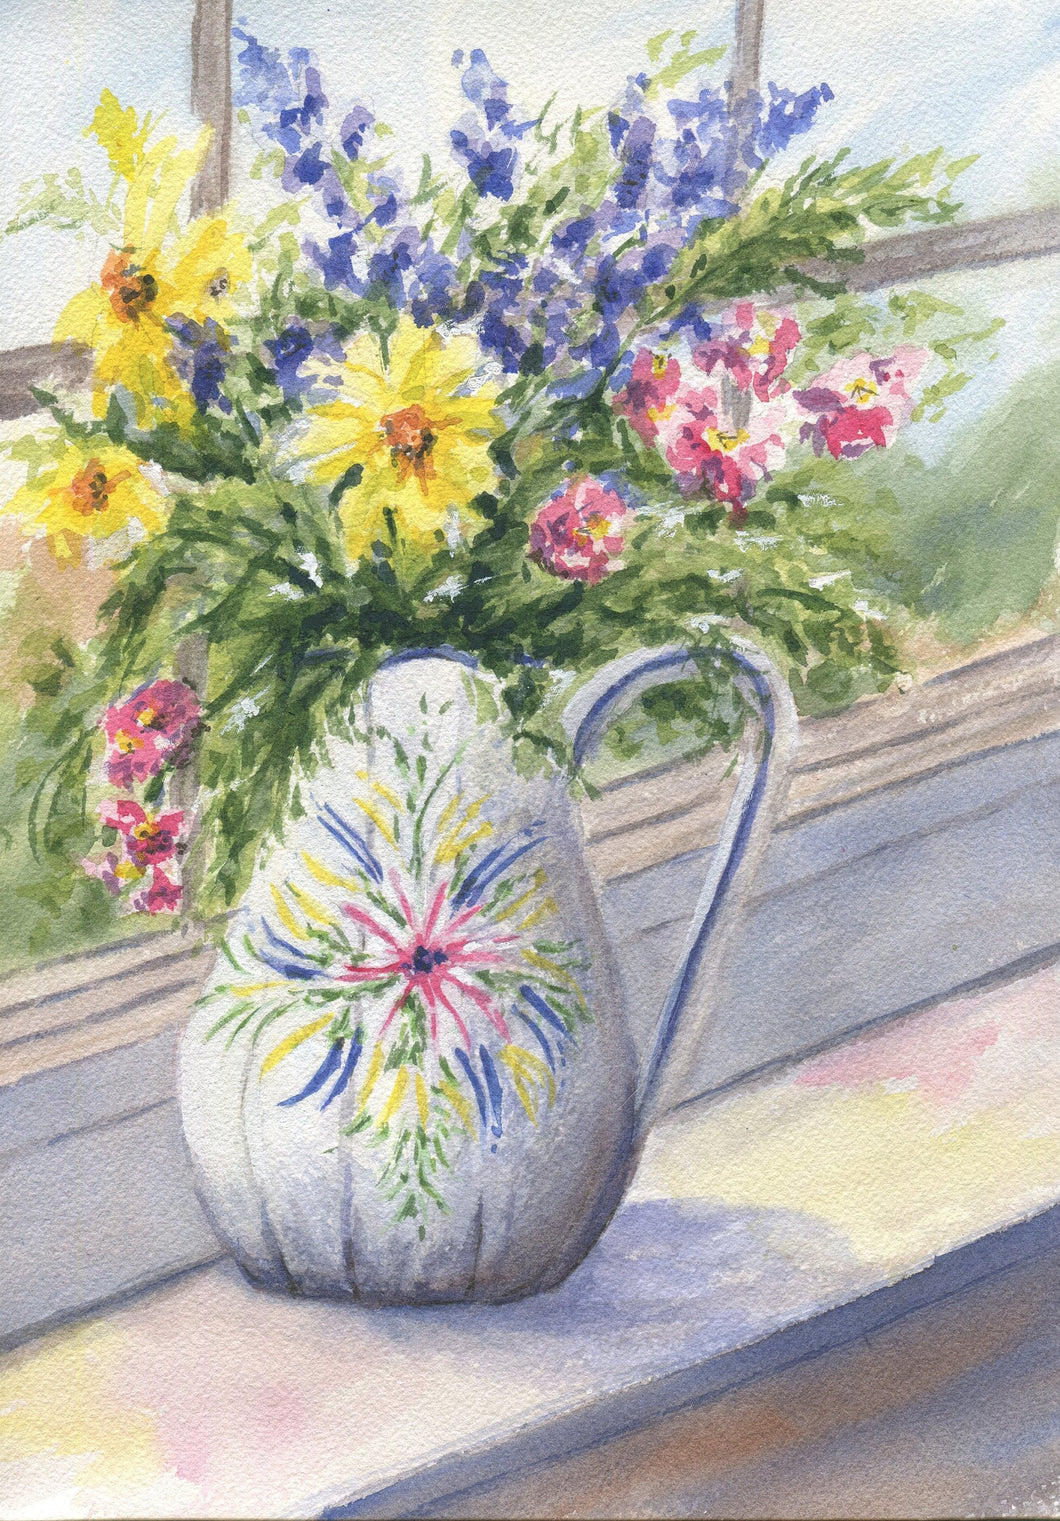 White Vase flower watercolor painting floral original art colorful floral wall decor flower painting print framed wall decor Leigh Barry Watercolor art - Leigh Barry Watercolors